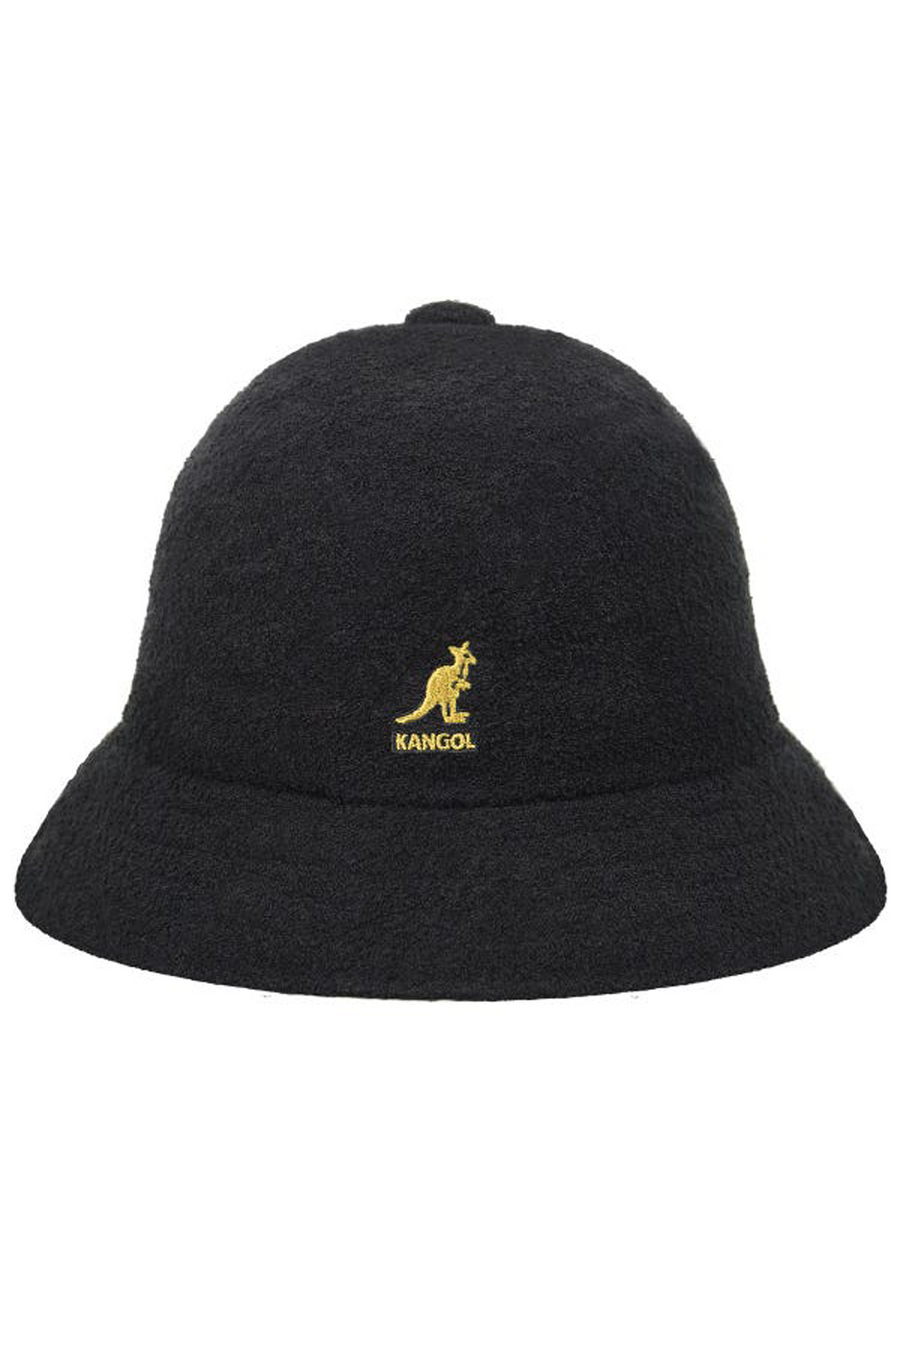 Buy the Kangol Bermuda Casual Hat in Black/Gold at Intro. Spend £50 for free UK delivery. Official stockists. We ship worldwide.